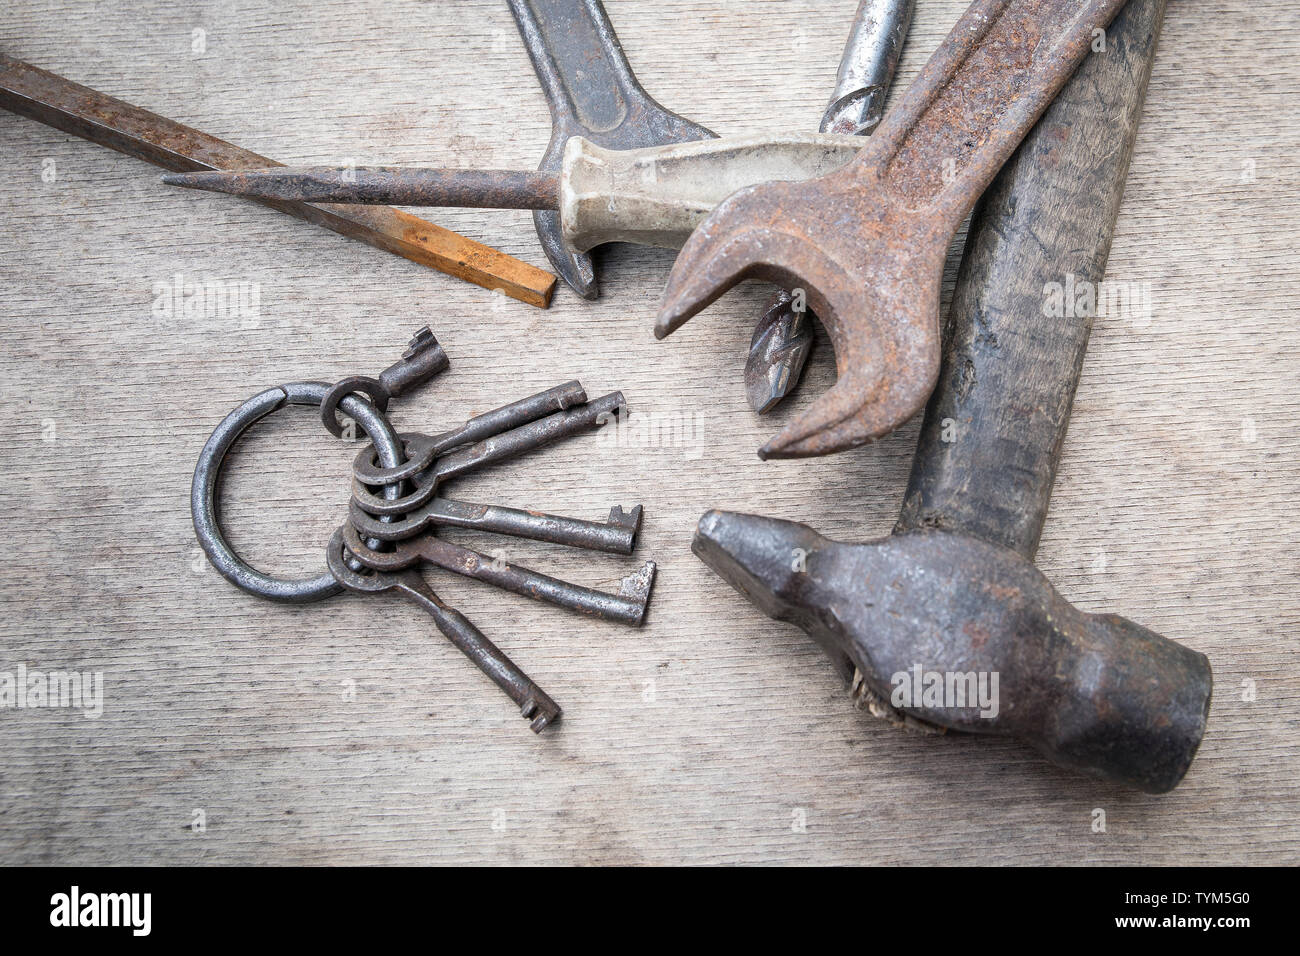 Bunch of different keys and hand tools on wooden board, maintenance and reparing concept Stock Photo